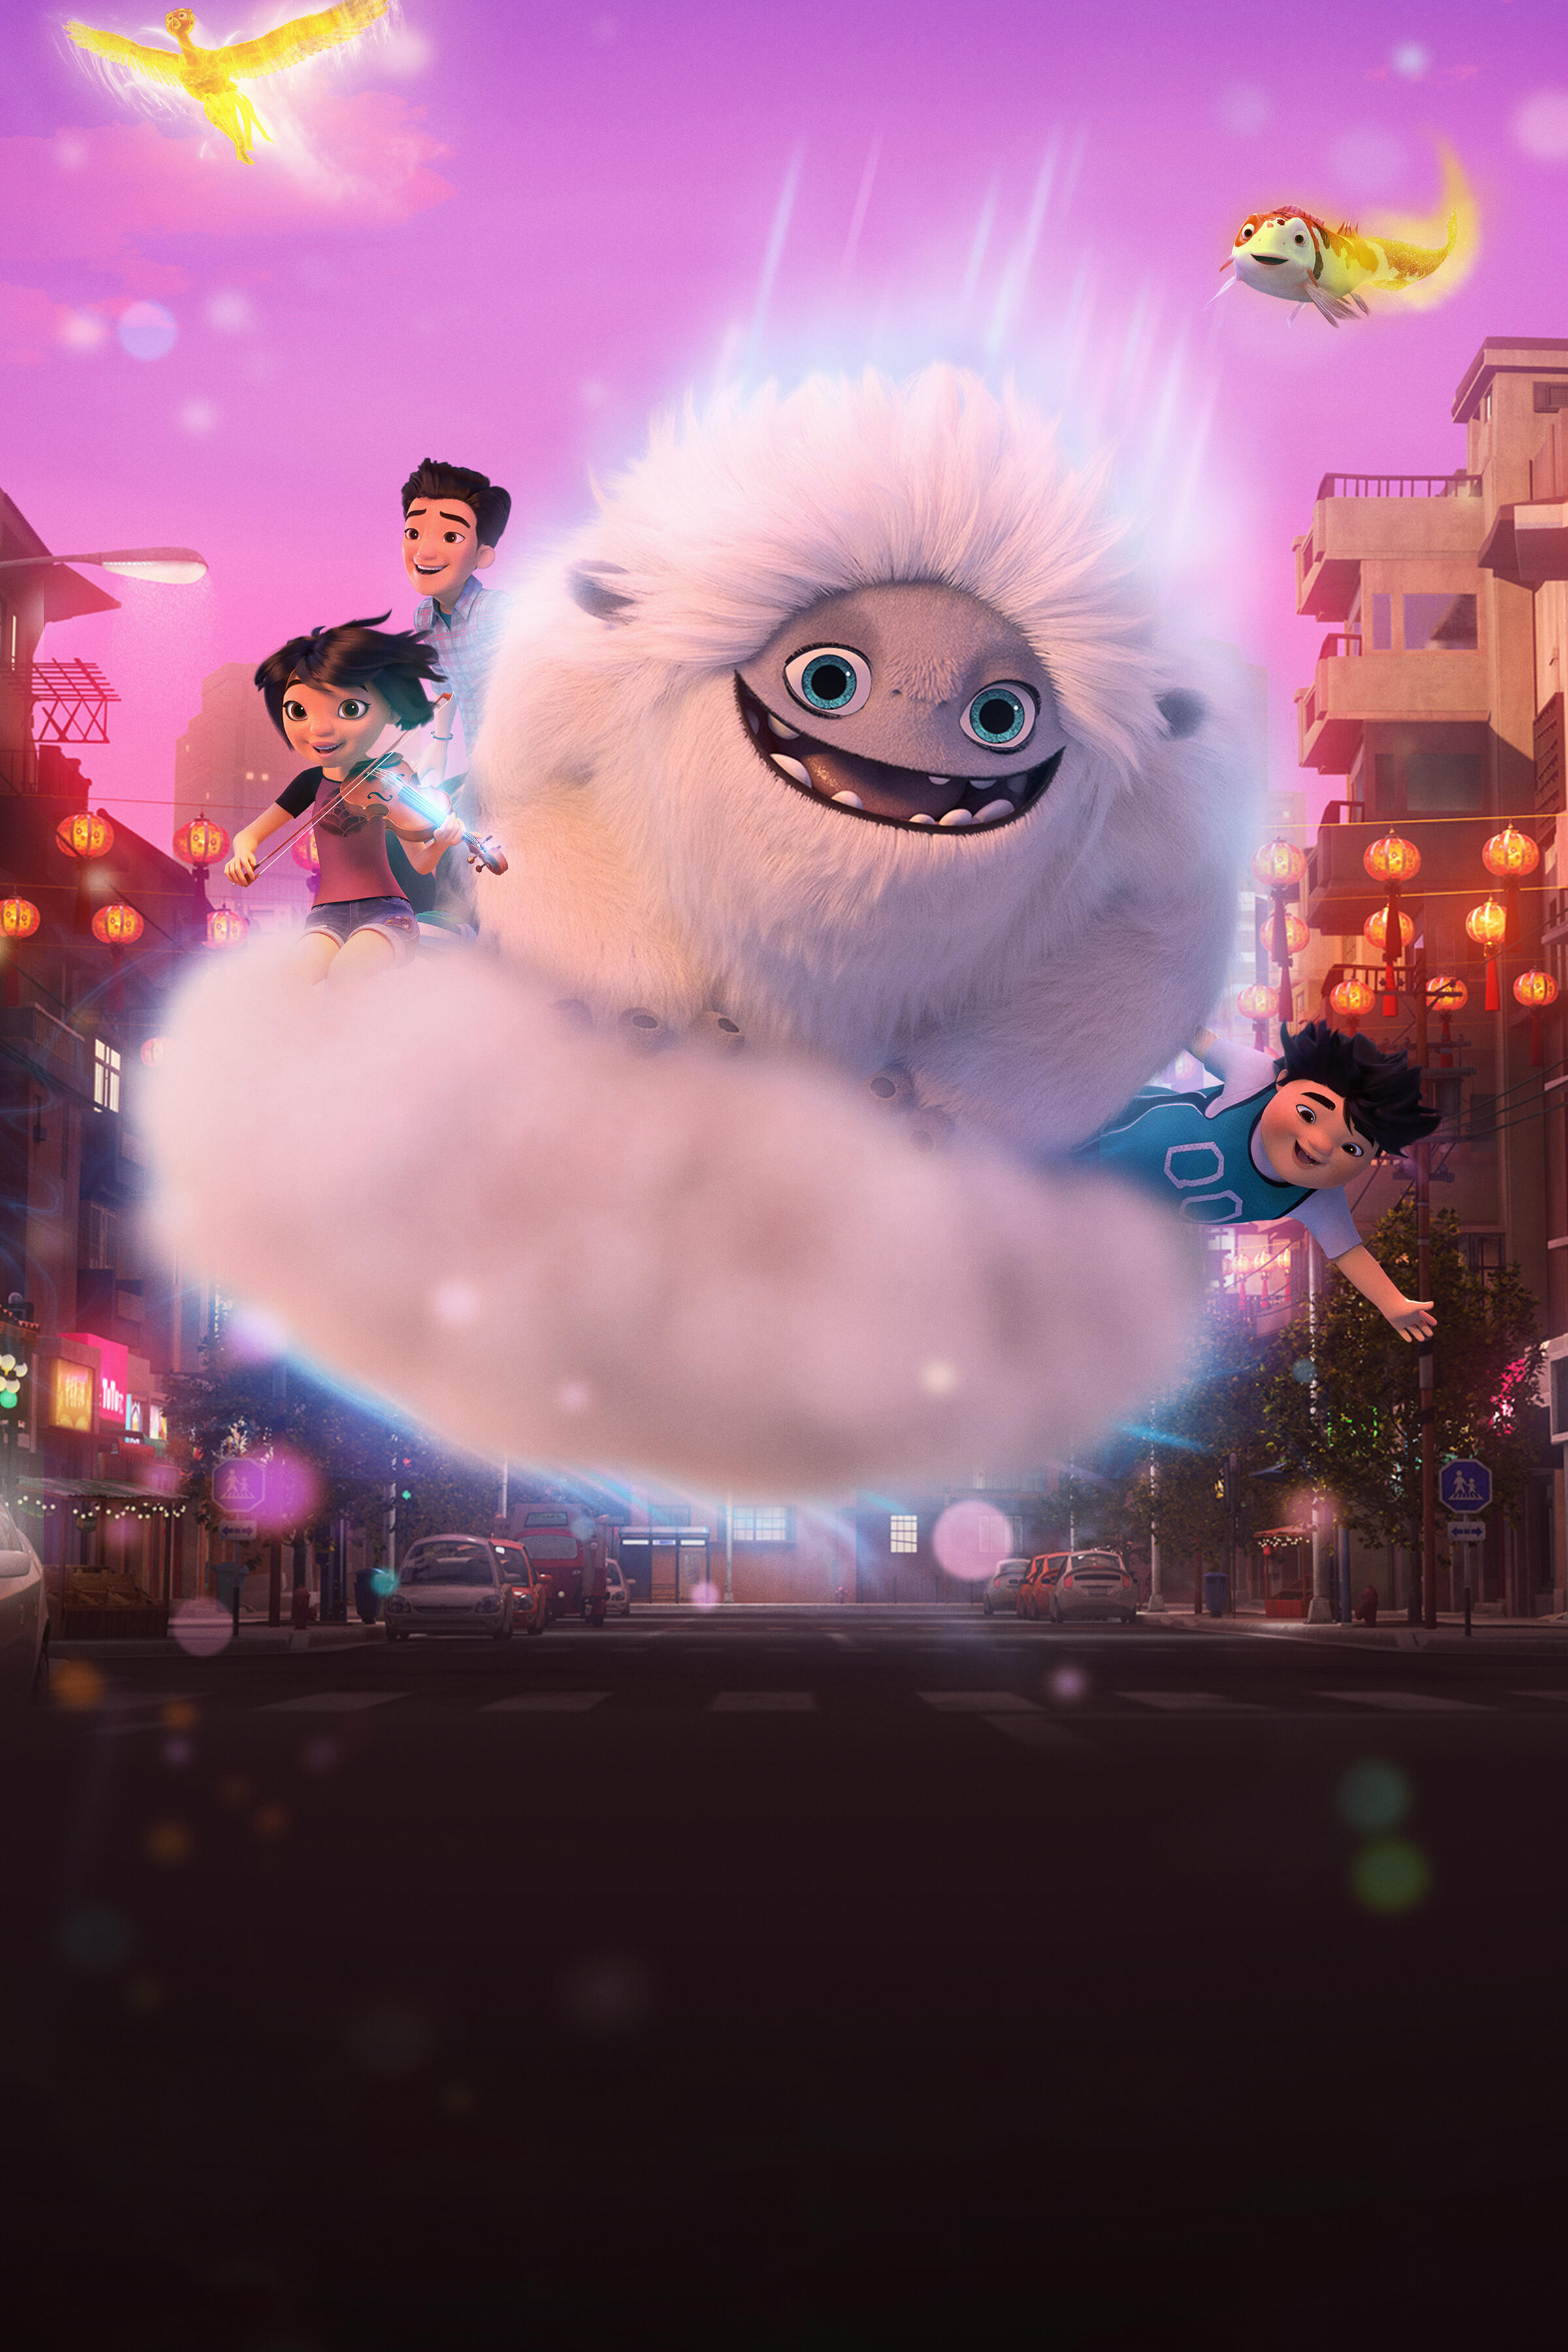 Abominable and the Invisible City -- Season 1 -- “Abominable and the Invisible City” is a comedy adventure series that continues the wild and wooly fun of DreamWorks Animation's “Abominable.” Through Everest the yeti, Yi, Jin, and Peng know that there’s a whole magical world out there, and now it’s even closer than they think! When they discover that their surroundings are teeming with magical creatures in need of their help, the kids will set out on extraordinary and heartfelt adventures throughout their city and beyond. (Courtesy of DreamWorks)